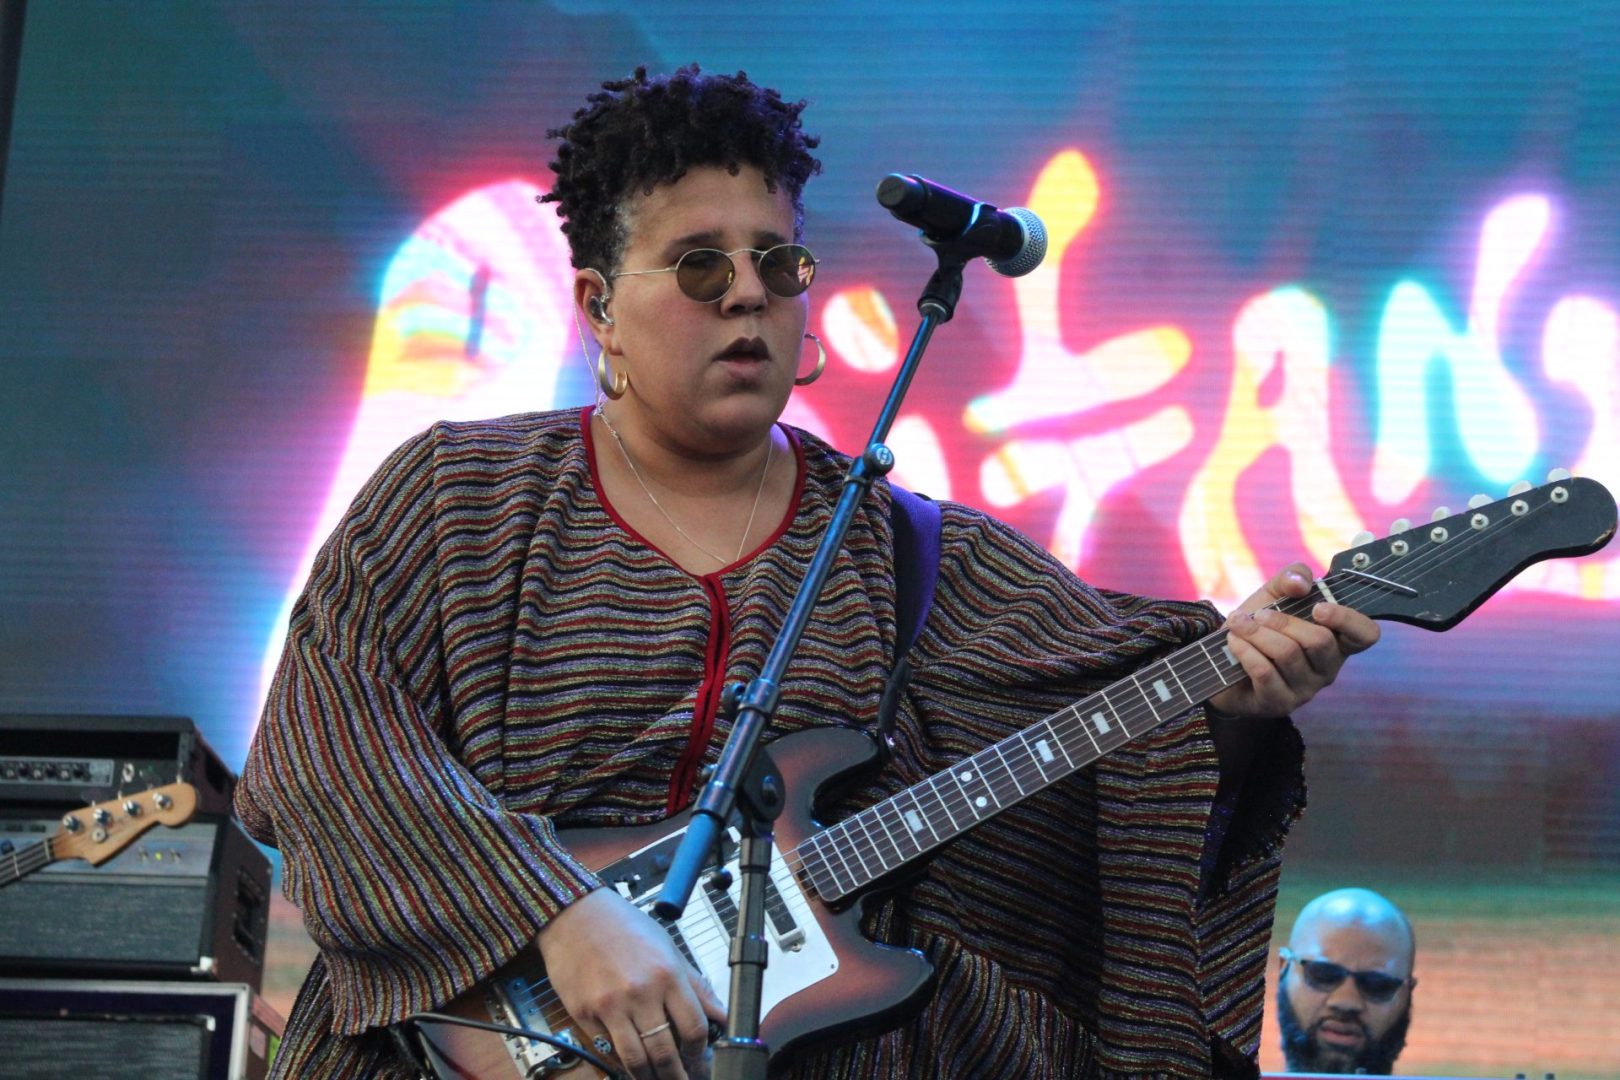 Pitchfork Music Festival's final day was a master class in soul and hip-hop